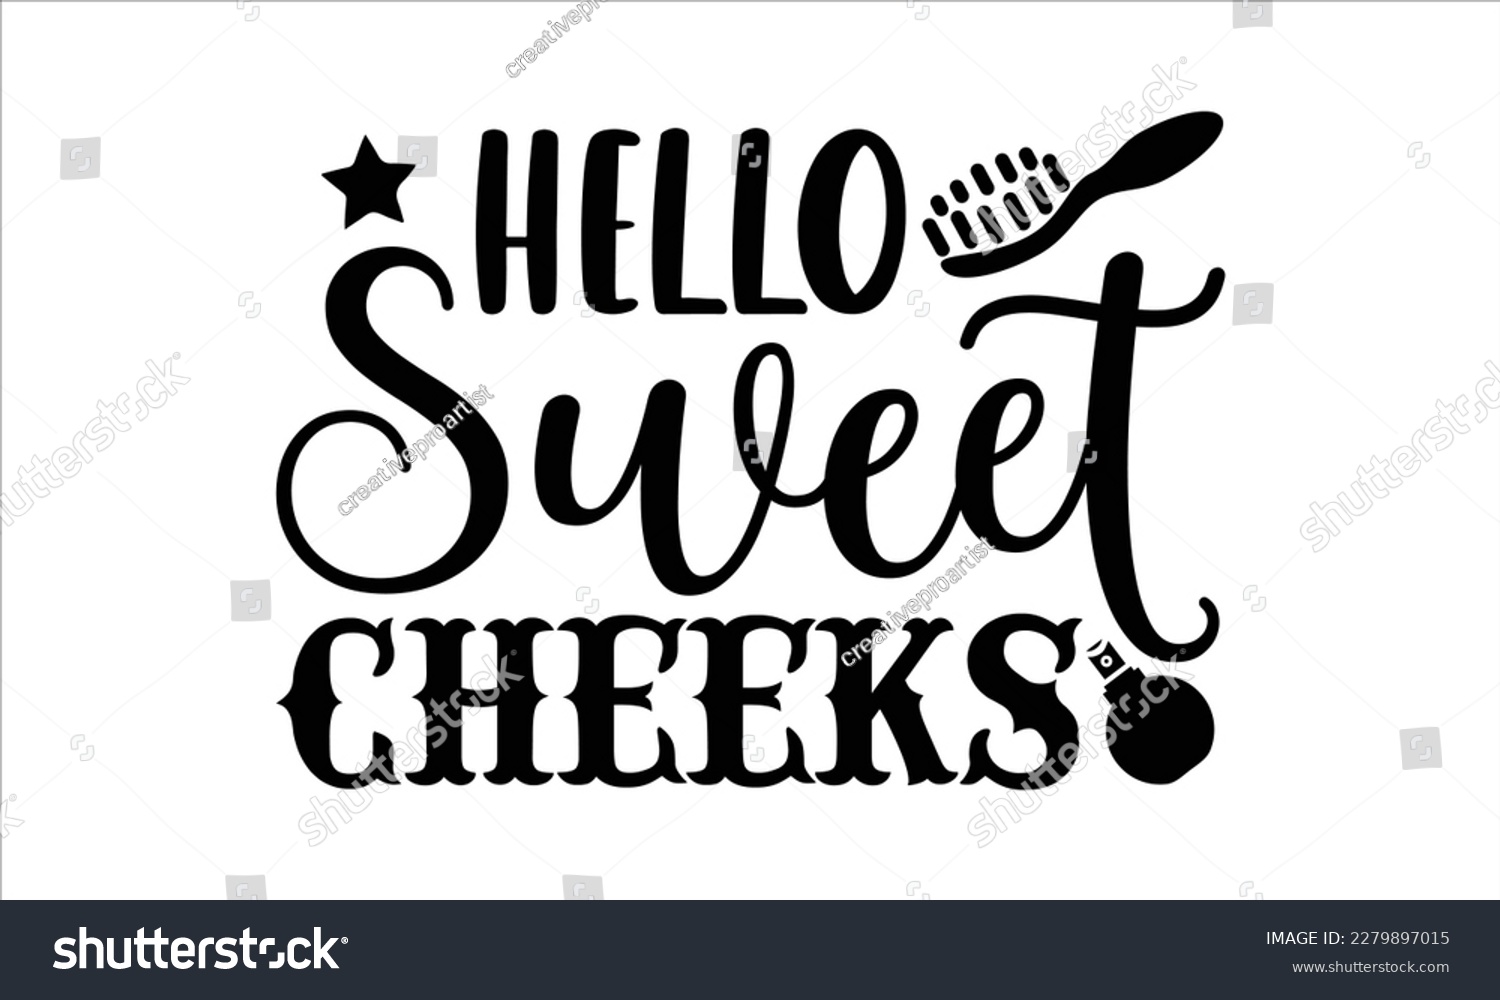 SVG of hello sweet cheeks- Bathroom t shirt design, Hand drawn lettering phrase, svg for Cutting Machine, Silhouette Cameo, Cricut Vector illustration Template, Isolated on white background, EPS 10 svg